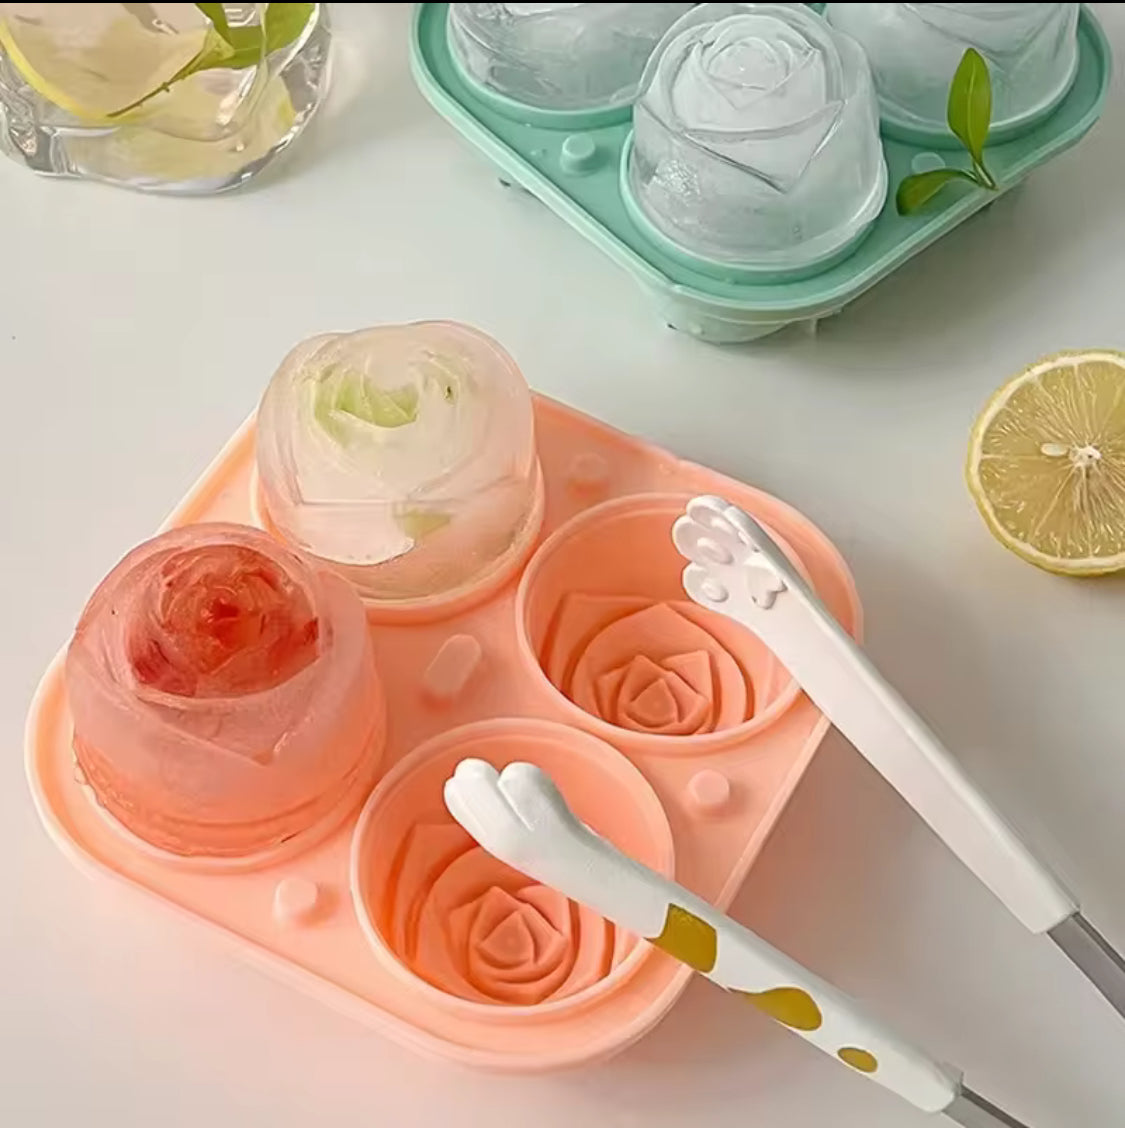 Silicone Rose Ice Mold, Flower Shaped Ice Mold, Silicone Big Ice Ball Maker